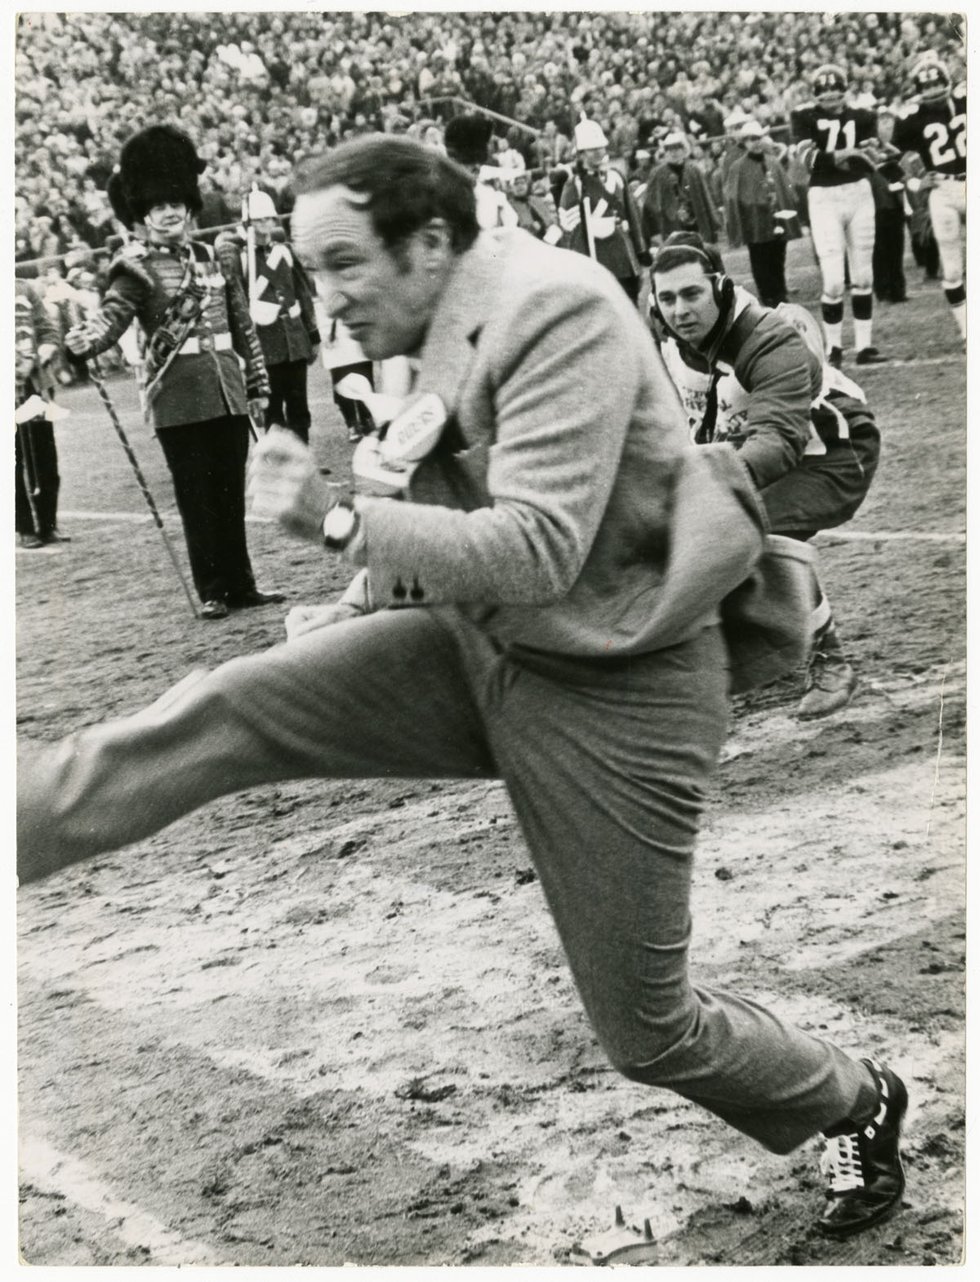 John Maiola, "Prime Minister Pierre Elliott Trudeau donned cleats for a kickoff that travelled less than 10 yards," 1968